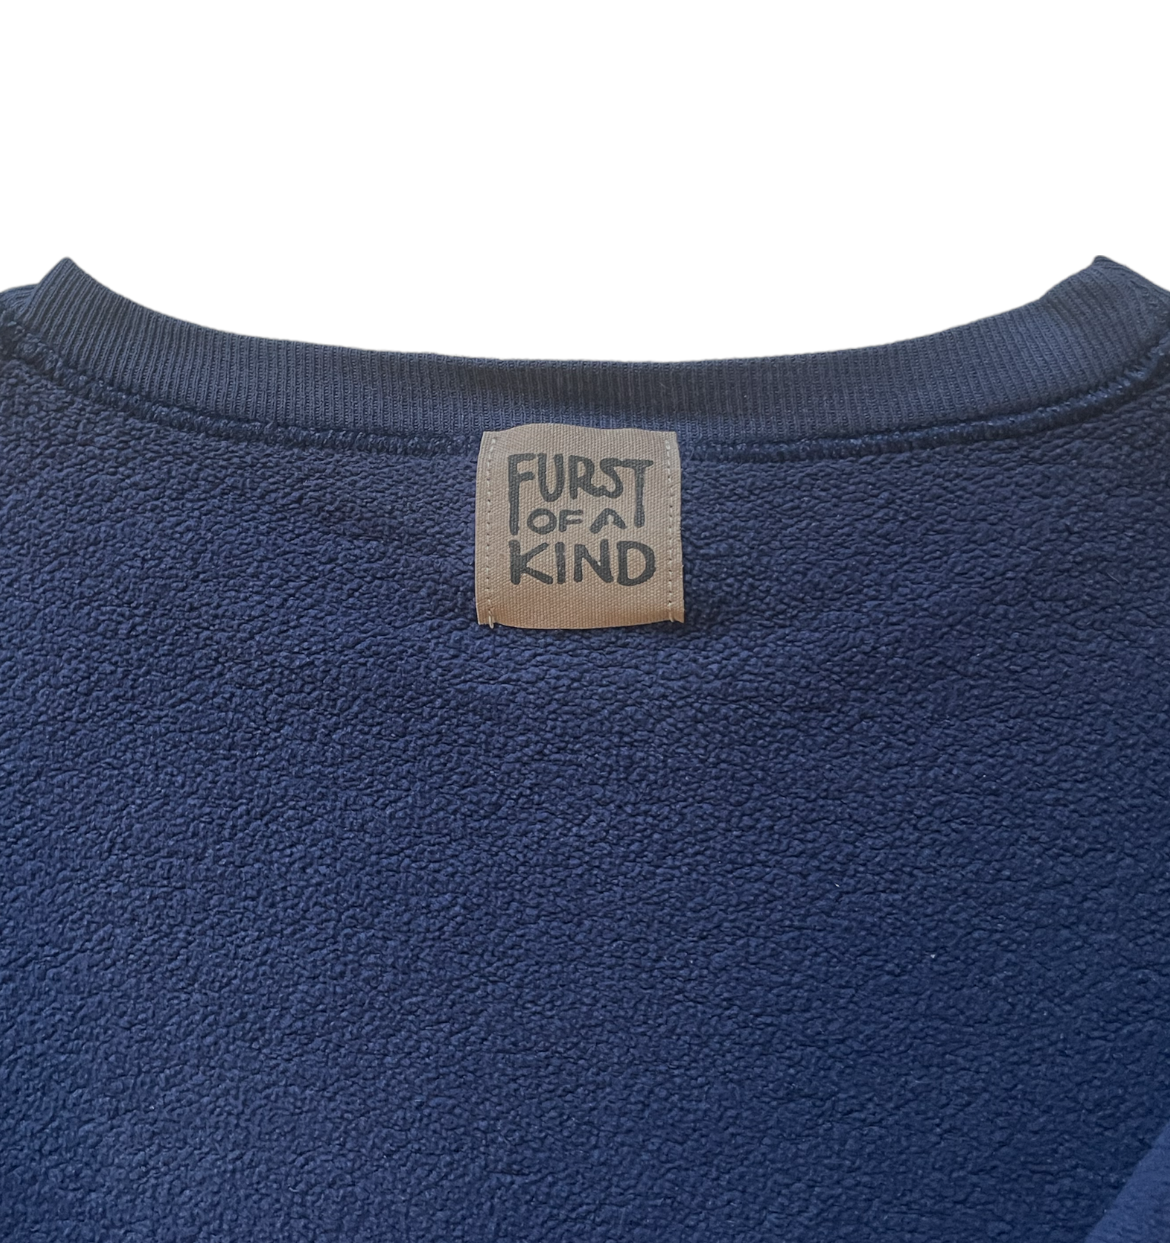 FURST OF A KIND VINTAGE COLLECTIBLE SWEATSHIRT | O/S |